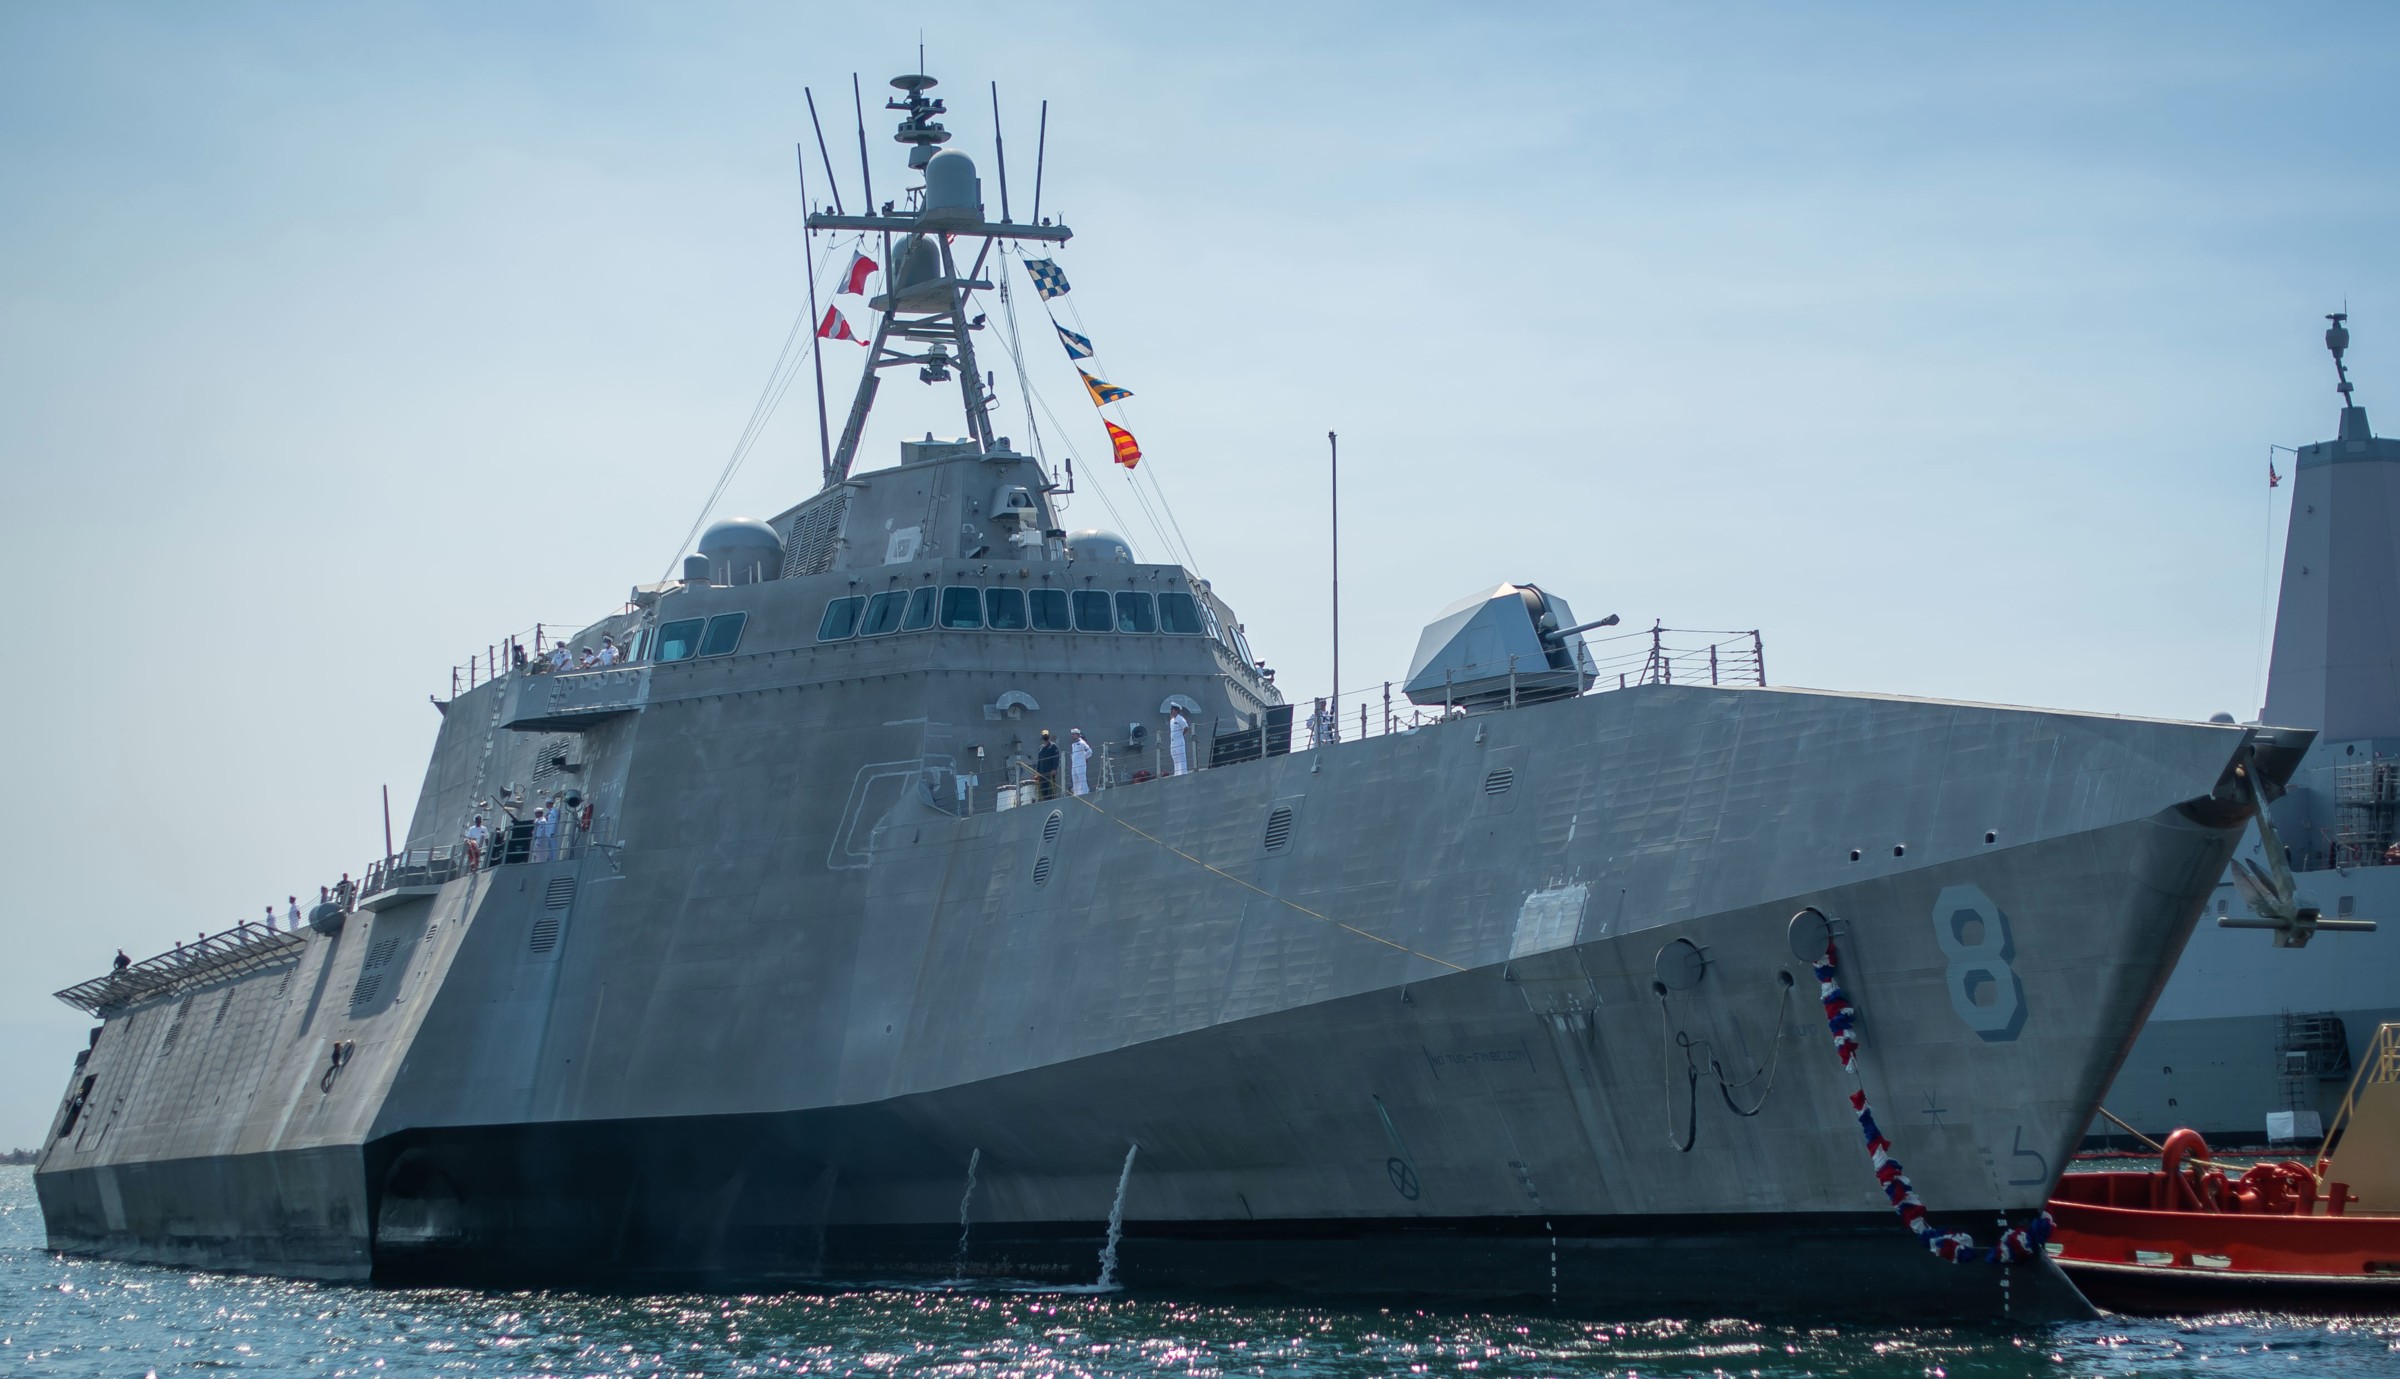 lcs-8 uss montgomery independence class littoral combat ship us navy 10 san diego naval base california